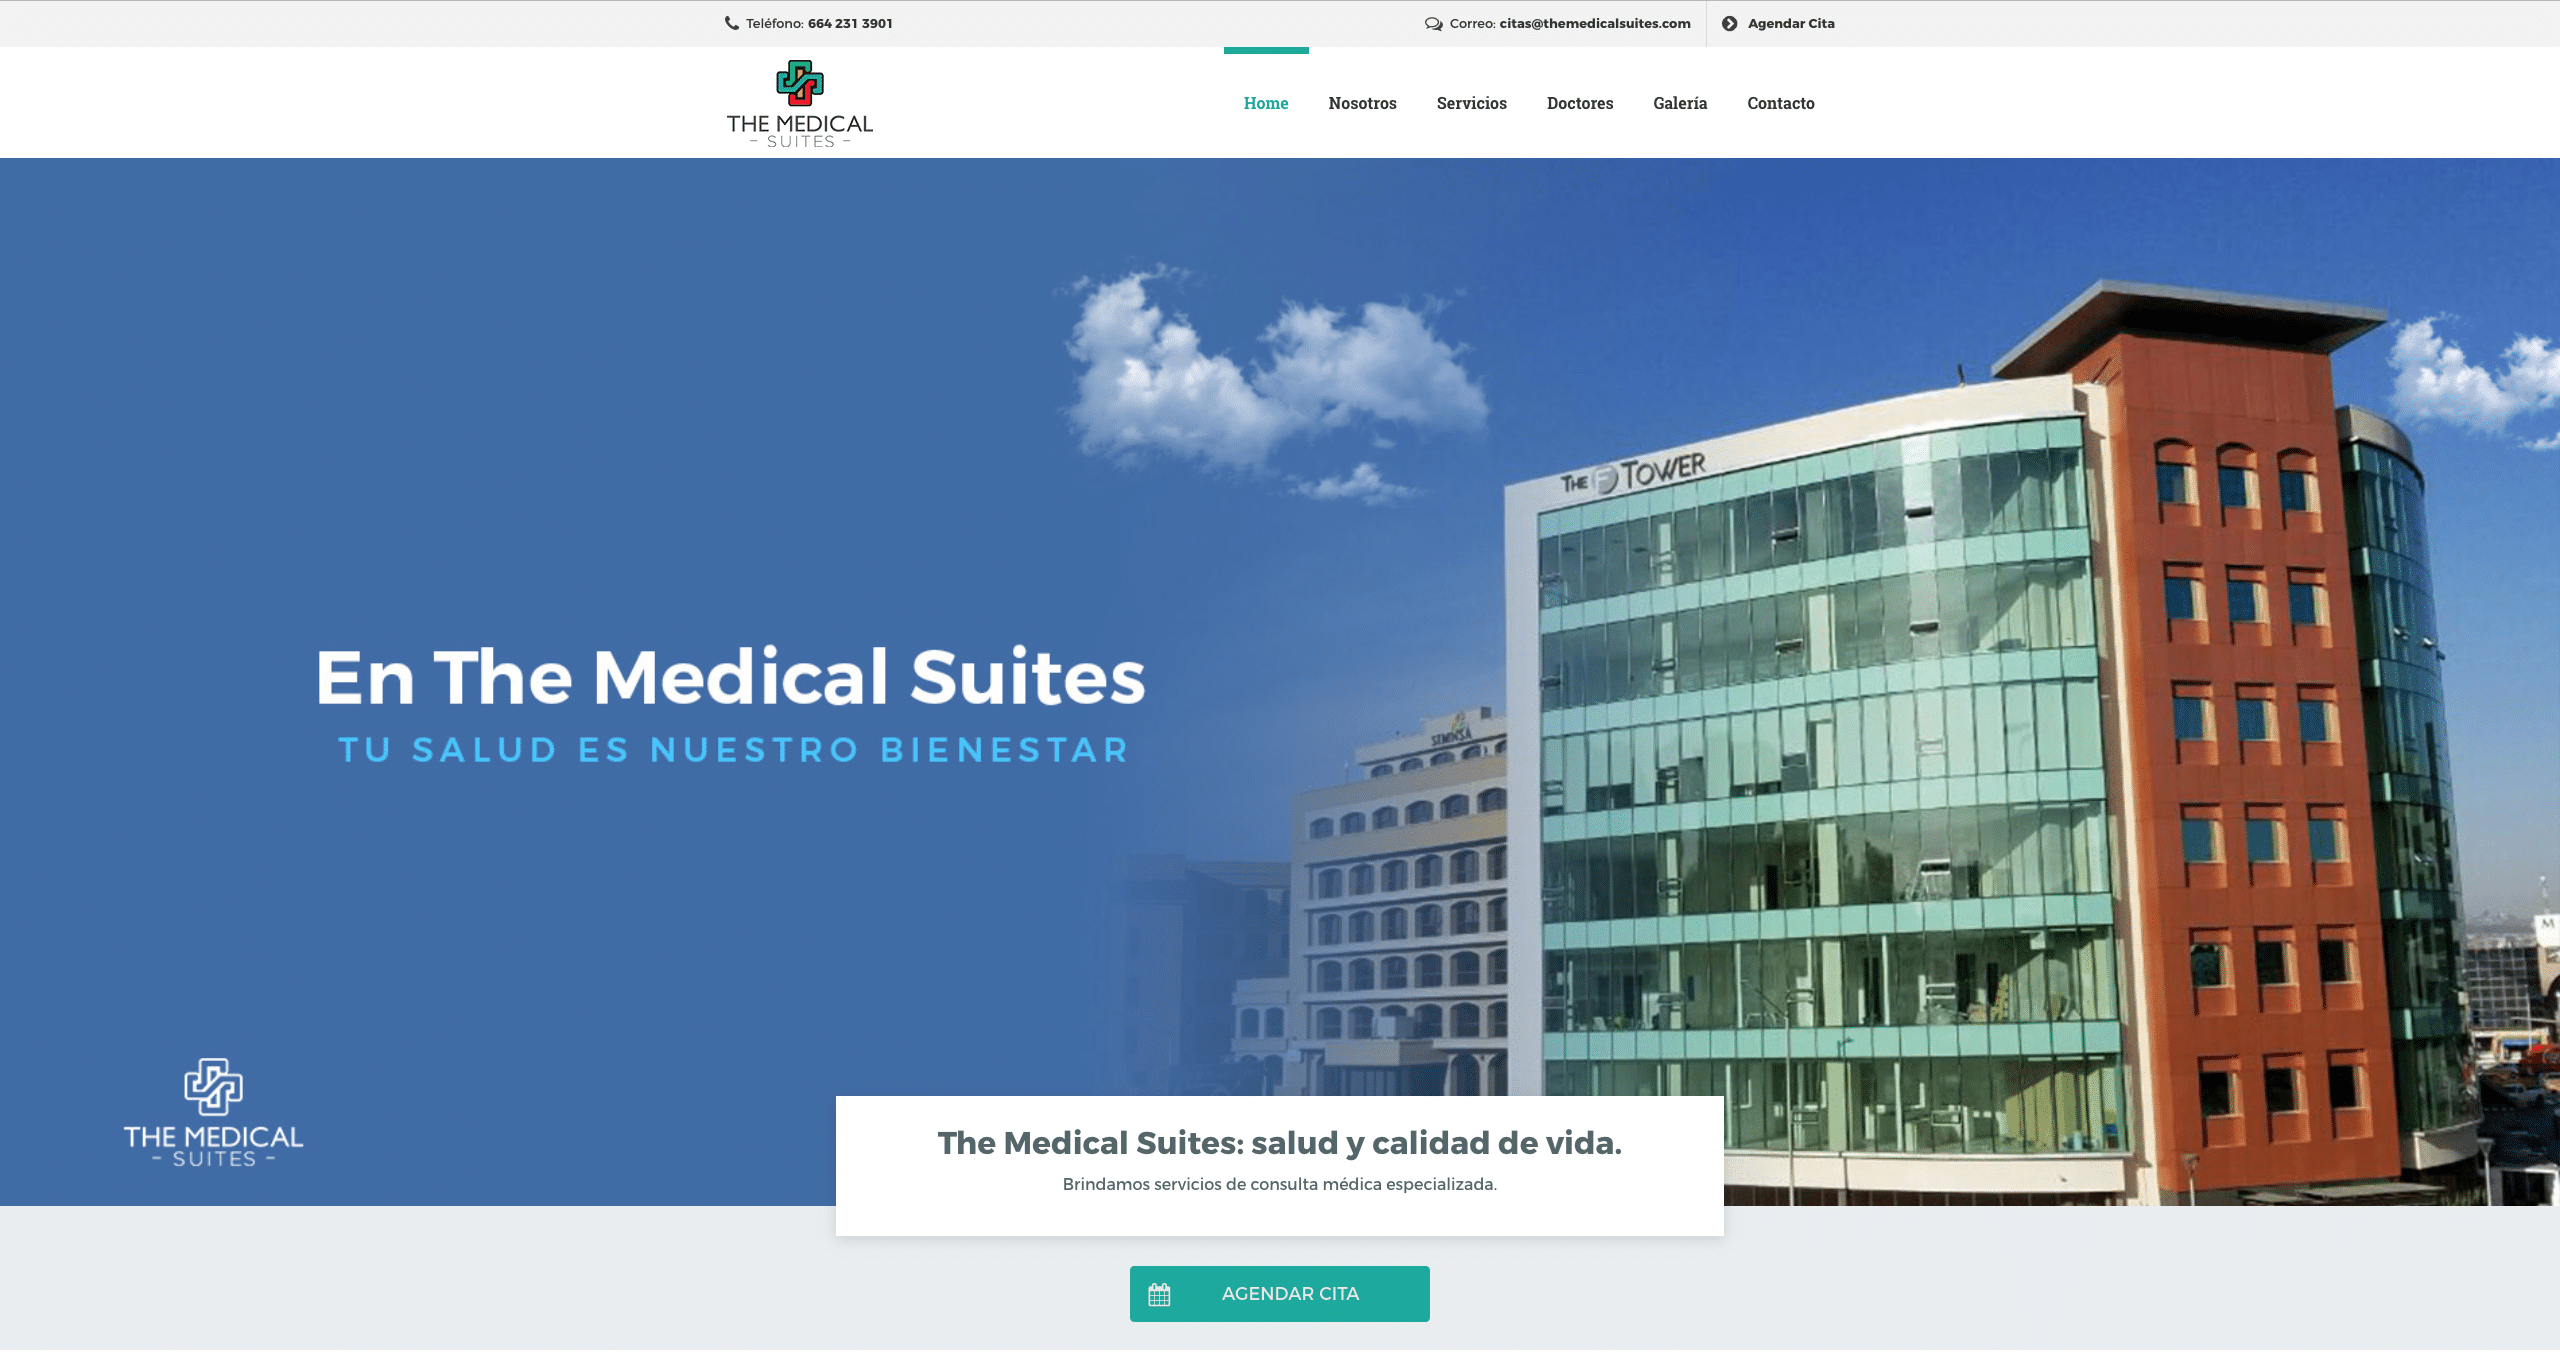 The Medical Suites